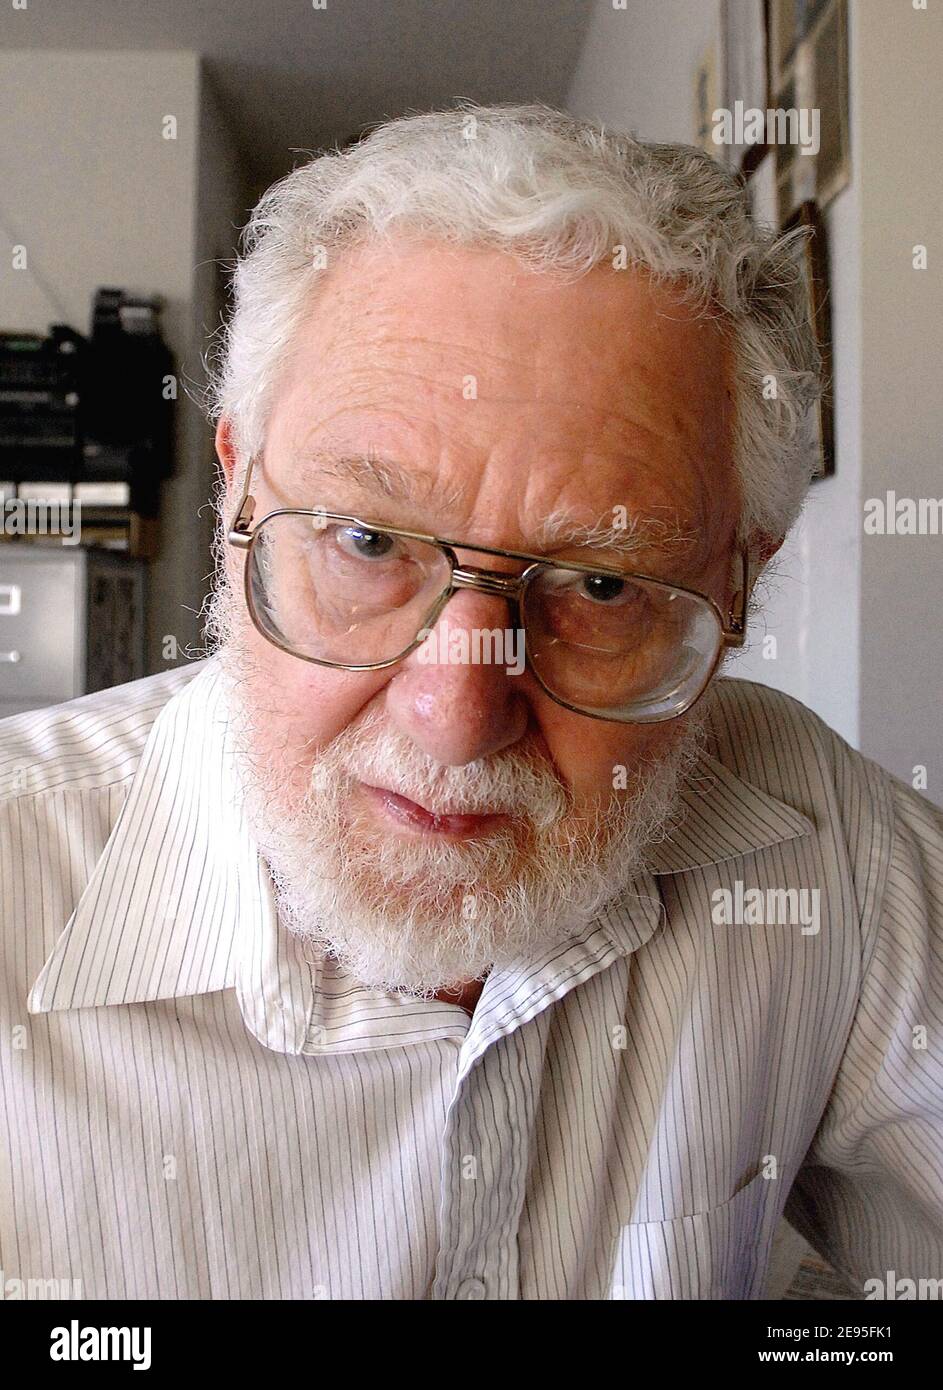 EXCLUSIVE - Author William Blum who got a big boost from Ossama bin Laden latest tape poses in his appartement in Washington DC, USA on Tuesday January 24, 2006. Blum, 72, is still adjusting after Osama bin Laden told the world that the American people should read his book 'Rogue State'. William Blum says that he is not repulsed by Bin Laden embrace of his book. 'Rogue State' shot up from 205,763 to 26 on Amazon.com's index of the most-ordered books. Photo by Olivier Douliery/ABACAPRESS.COM Stock Photo